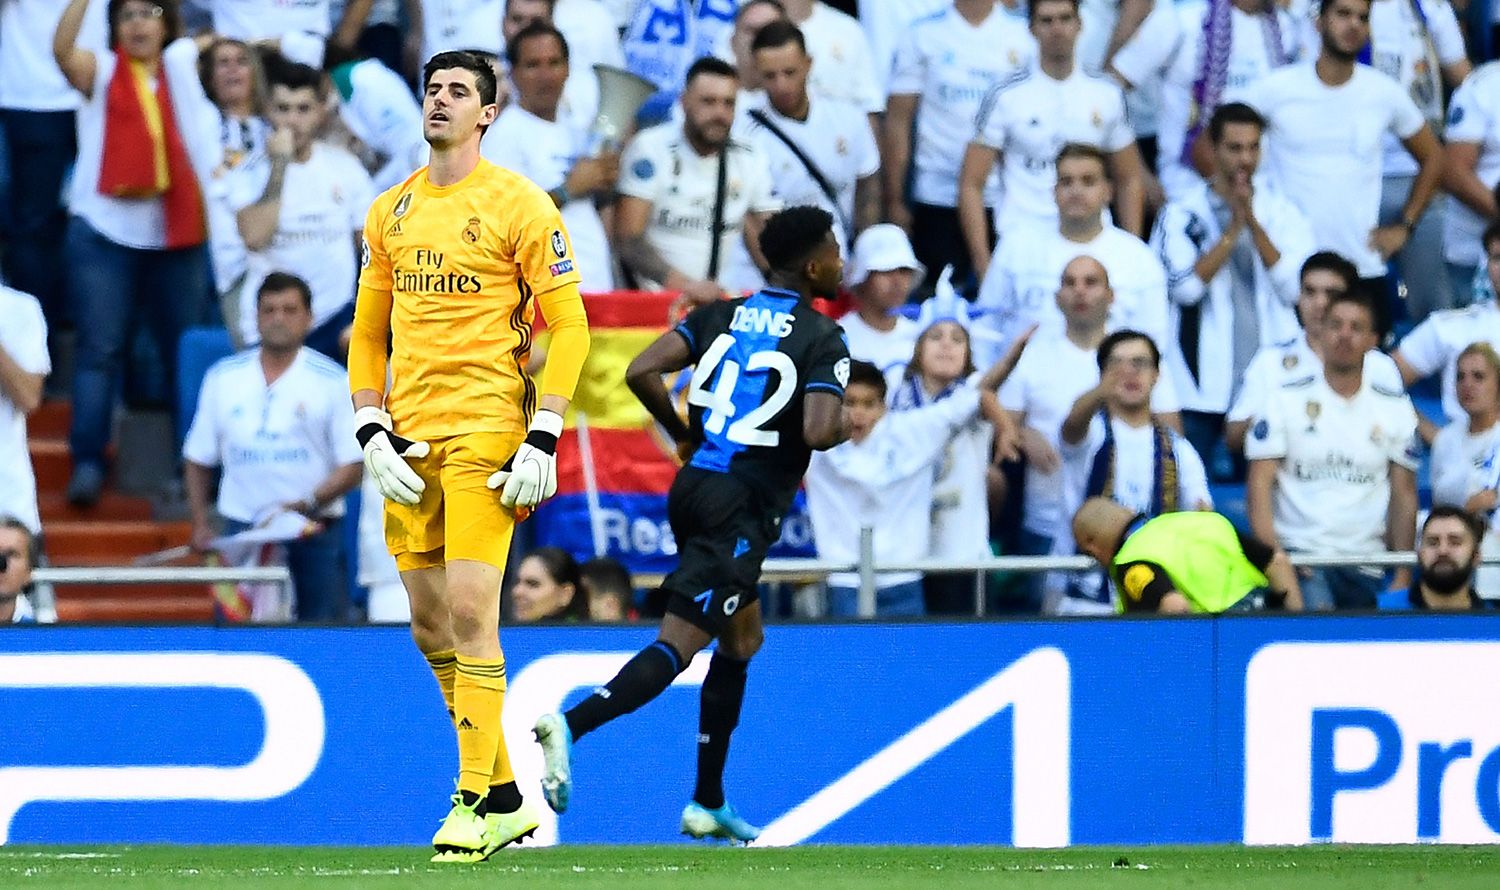 Courtois Regrets  after the goal of the Witches